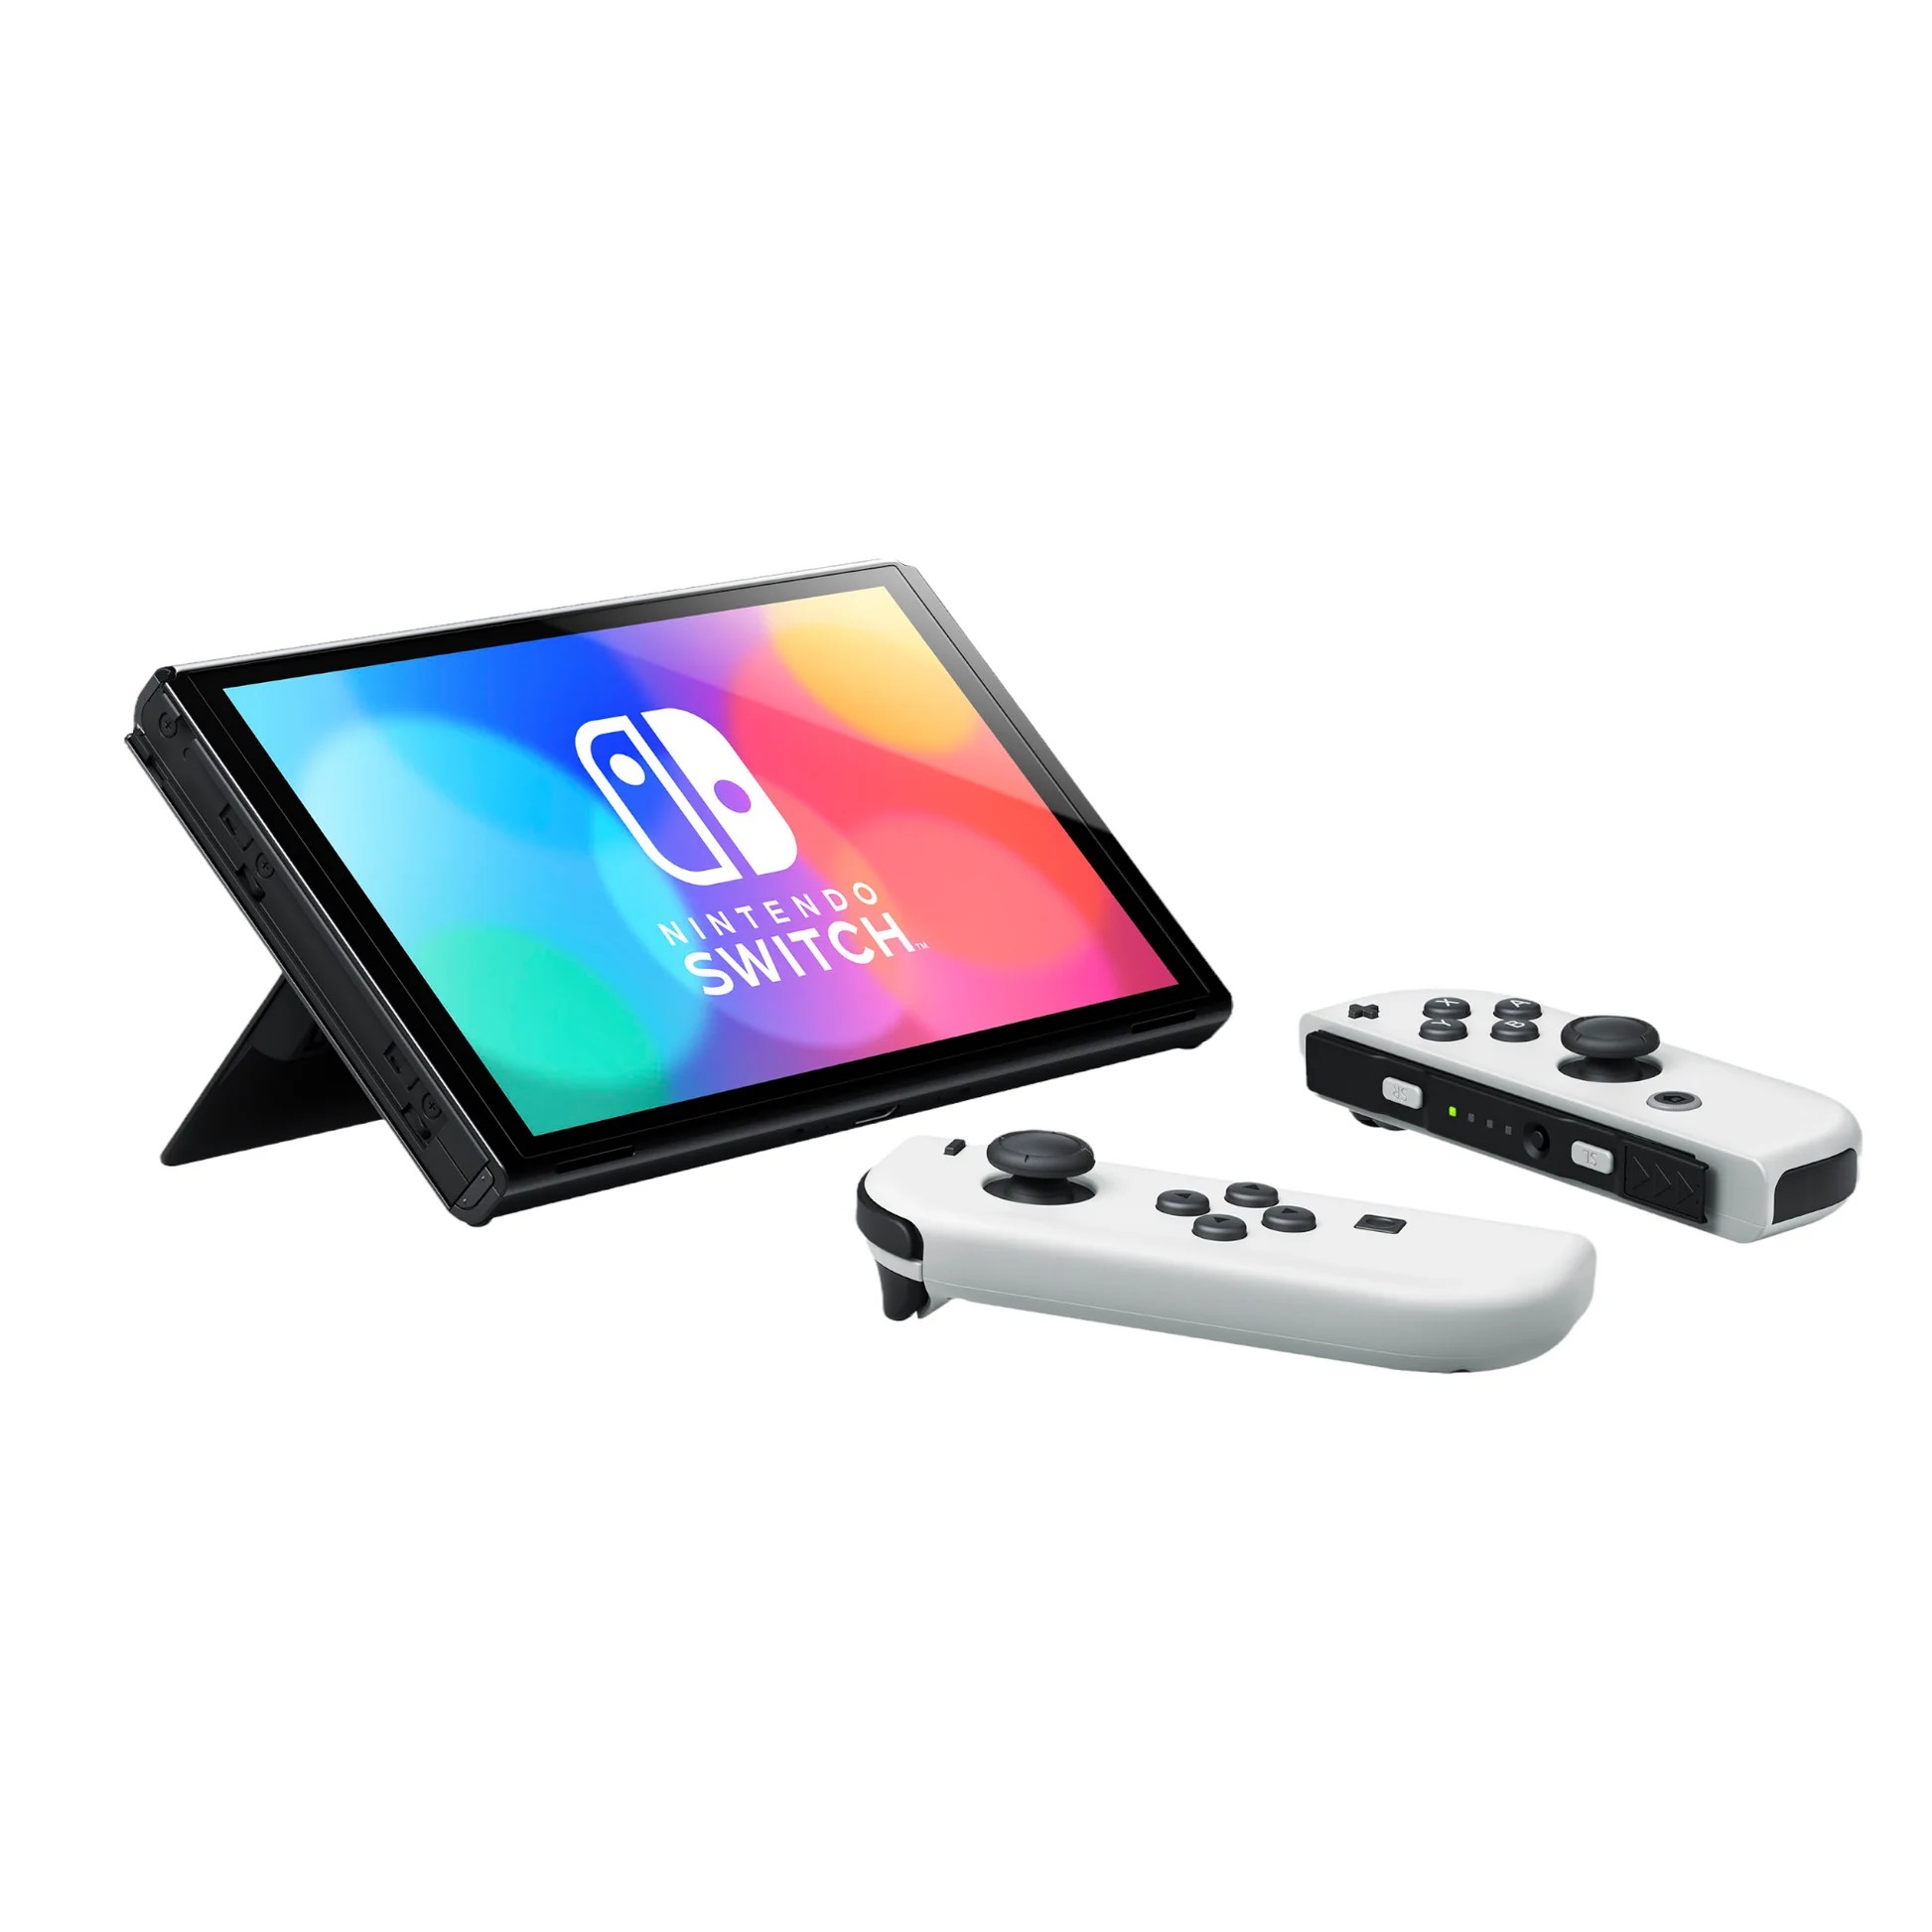 Game Console Portabil Nintendo Switch OLED Model, 64GB, White, 7" Oled screen, Three modes: Handheld / TV / Tabletop, Wide and Adjustable stand, Built-in wired LAN port in dock-station